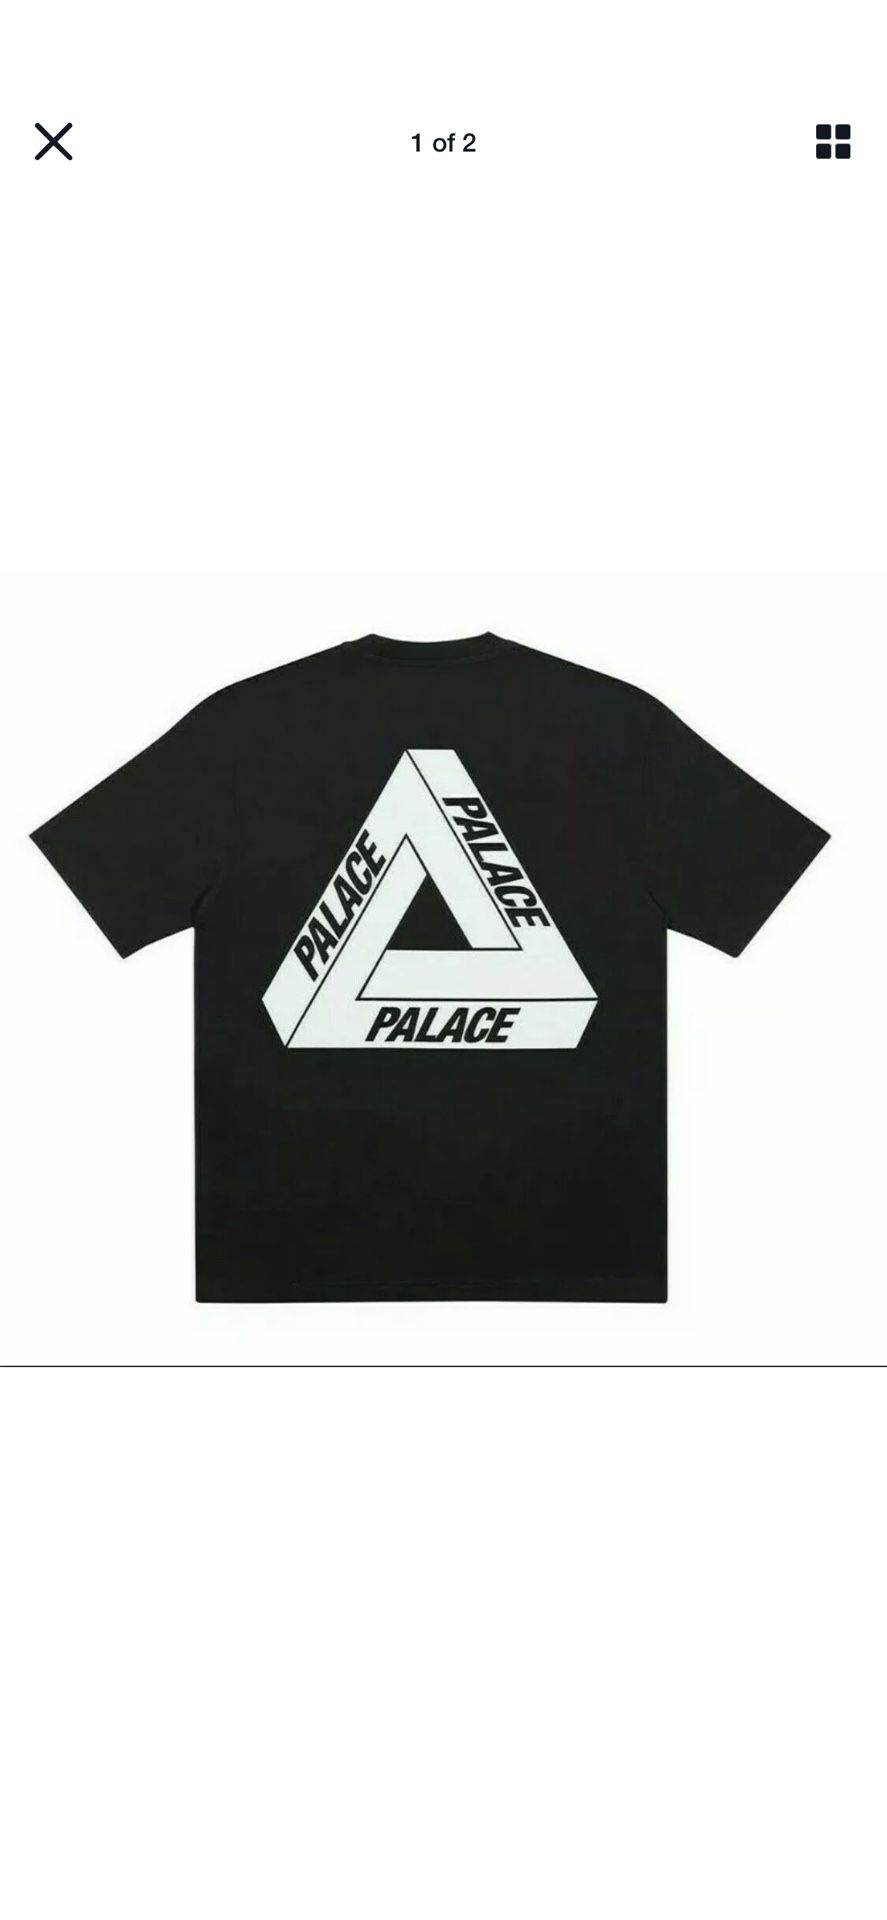 Palace SkateBoarding Tri-To-Help Tee Size M Baby Blue